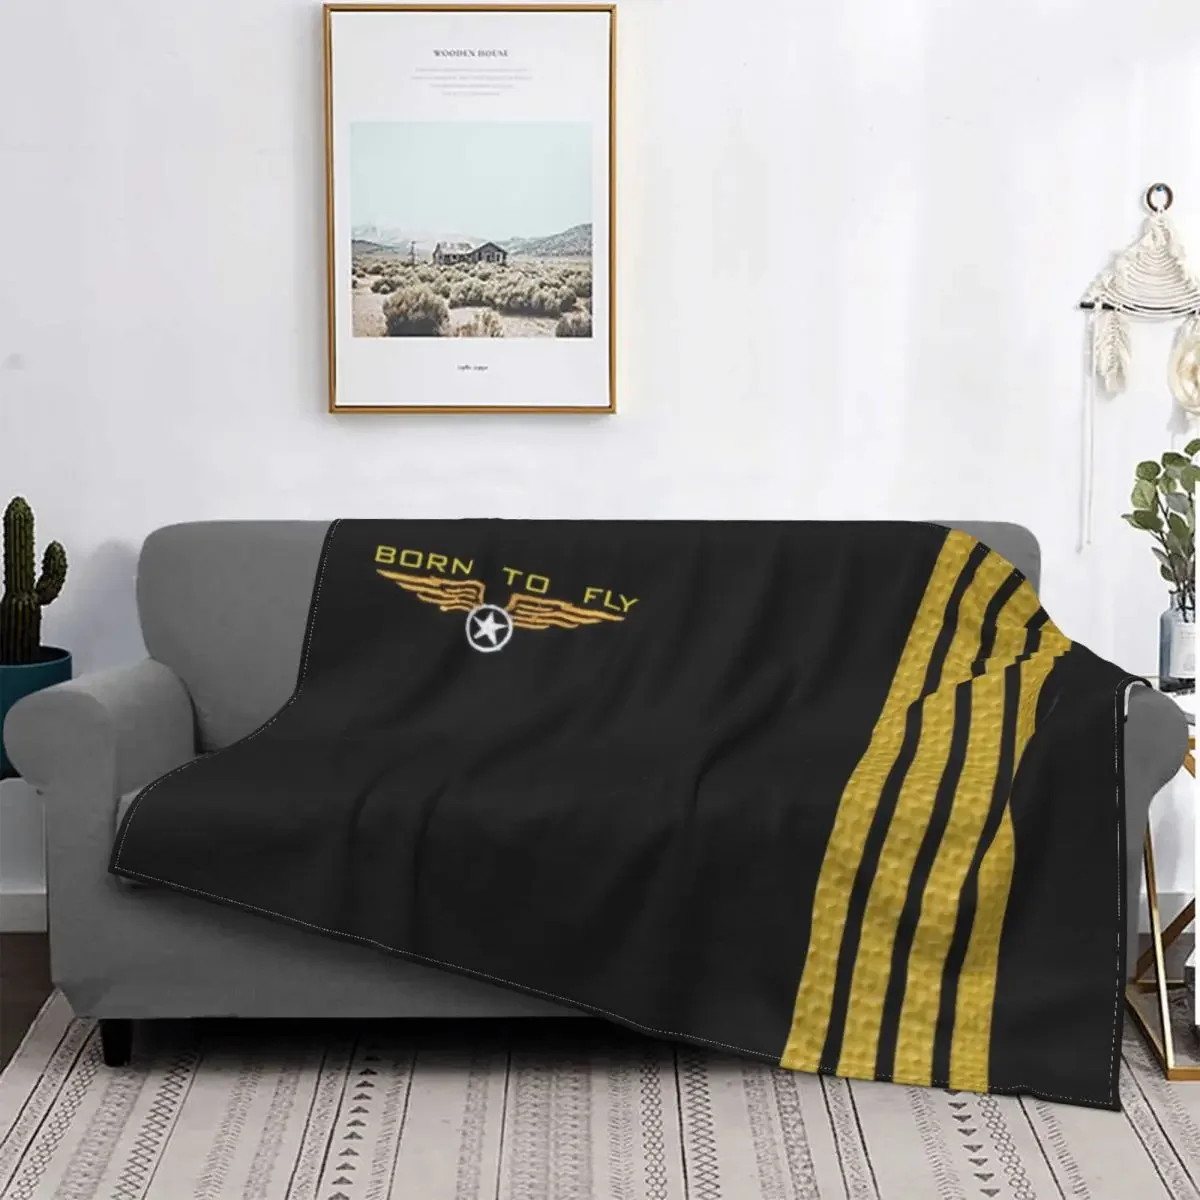 

Ultra-Soft Fleece Born To Fly Flight Pilot Throw Blanket Warm Flannel Flying Aviation Aviator Blanket for Bed Office Couch Quilt